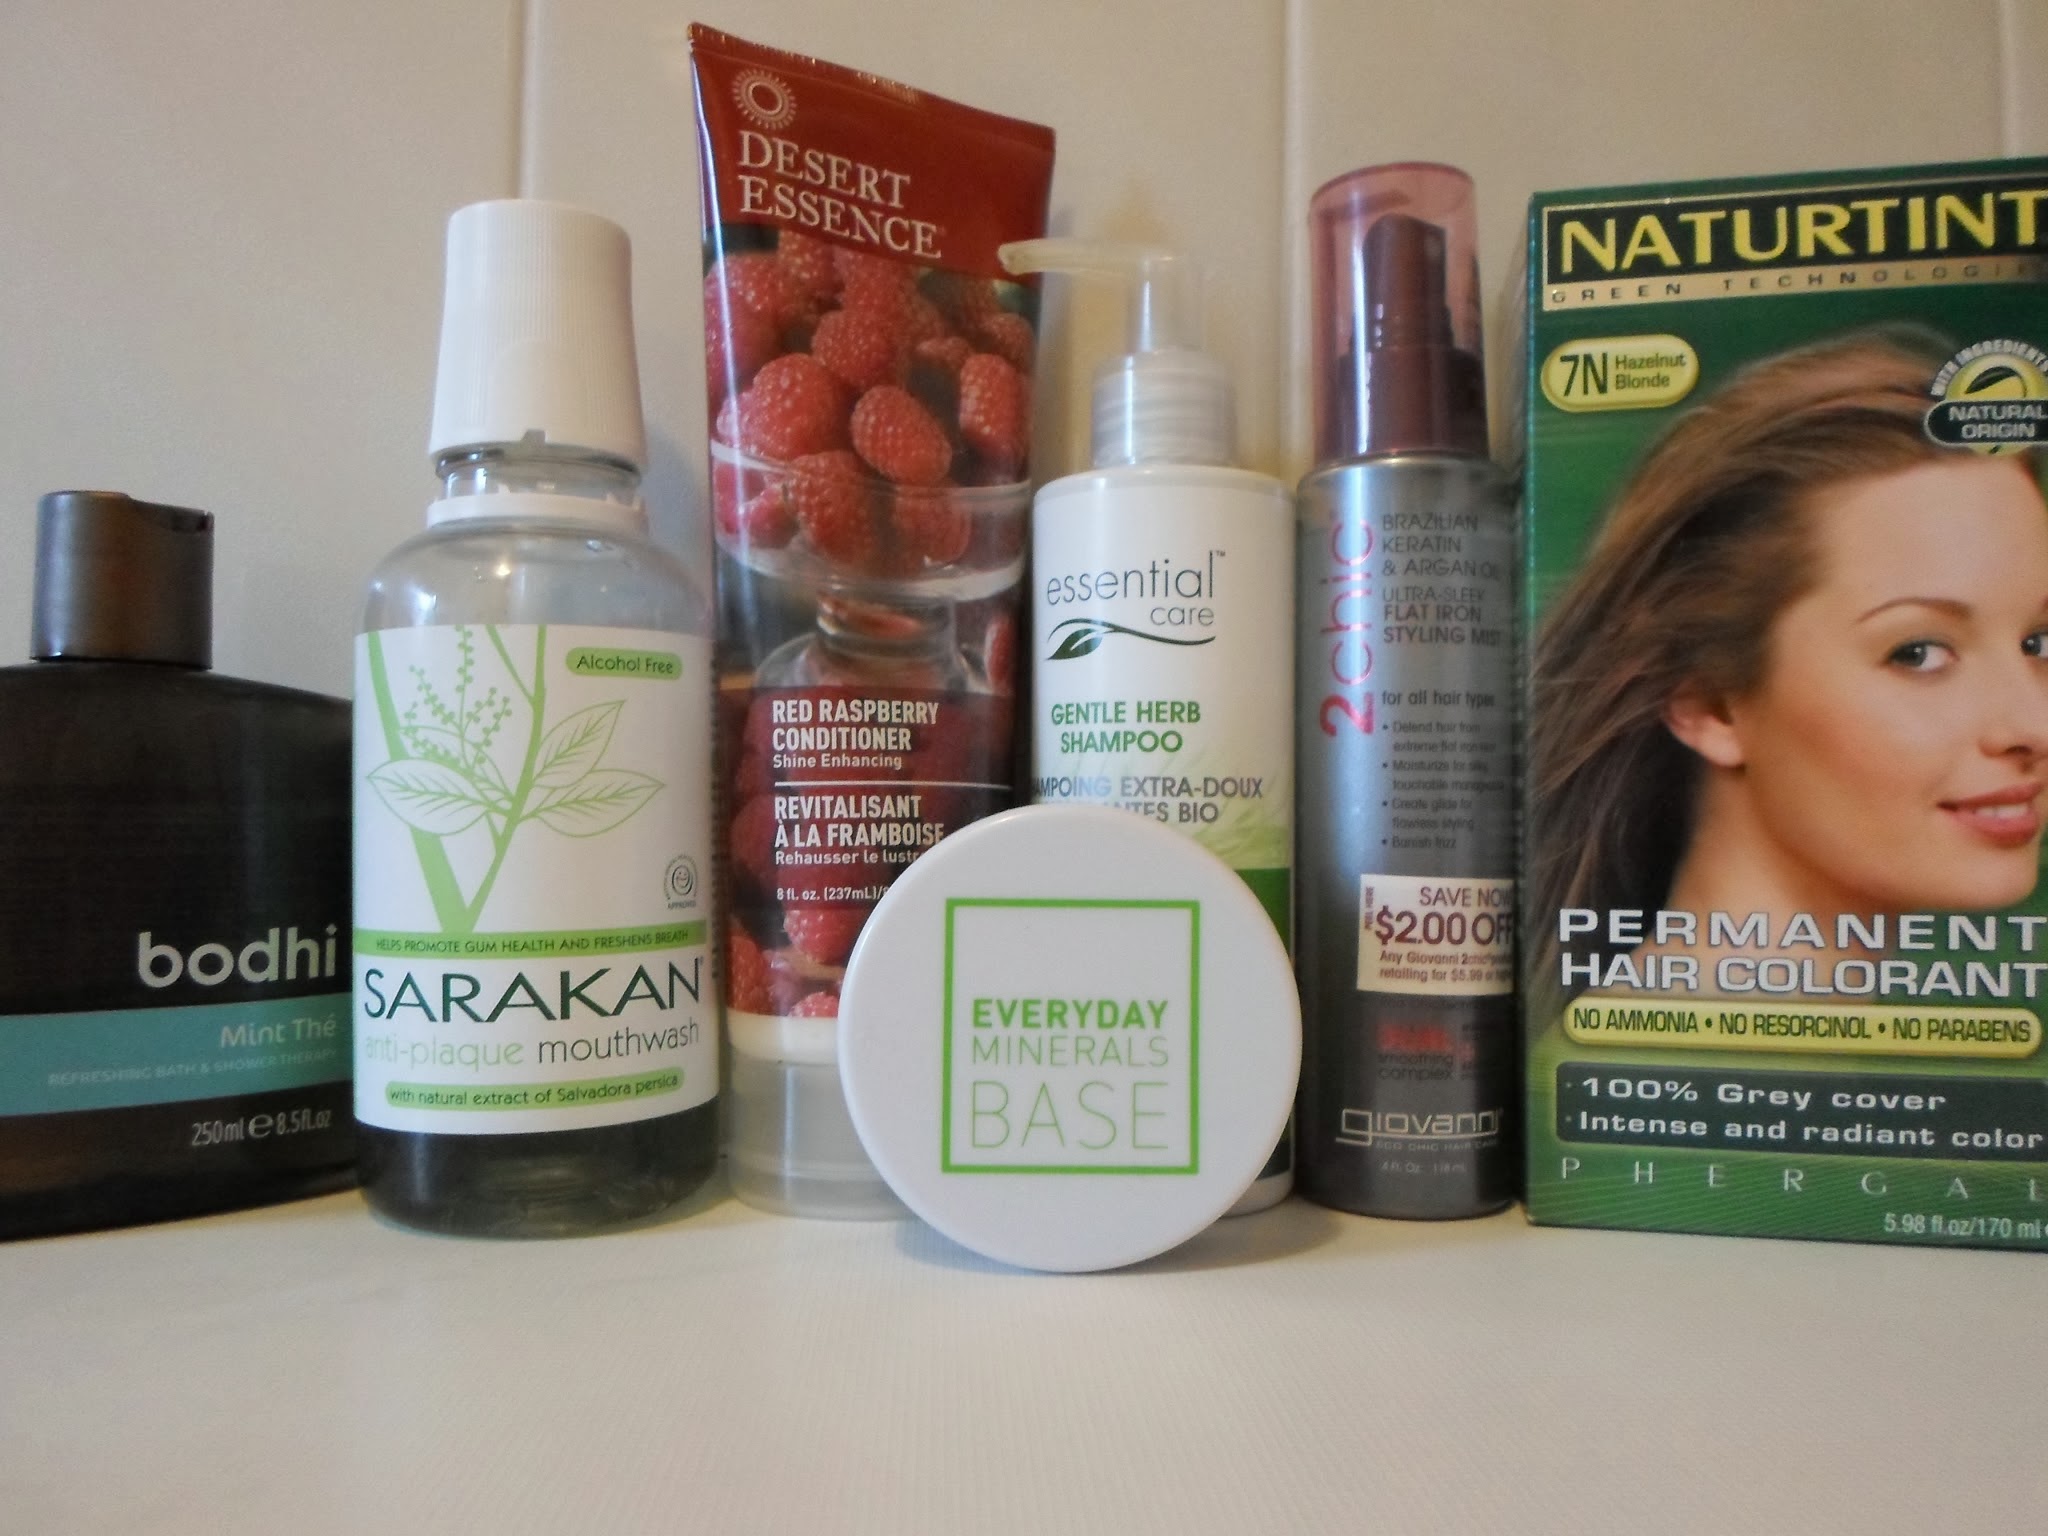 Repurchase Products of 2013 featuring Desert Essence, Sarakan, Naturtint, Giovanni